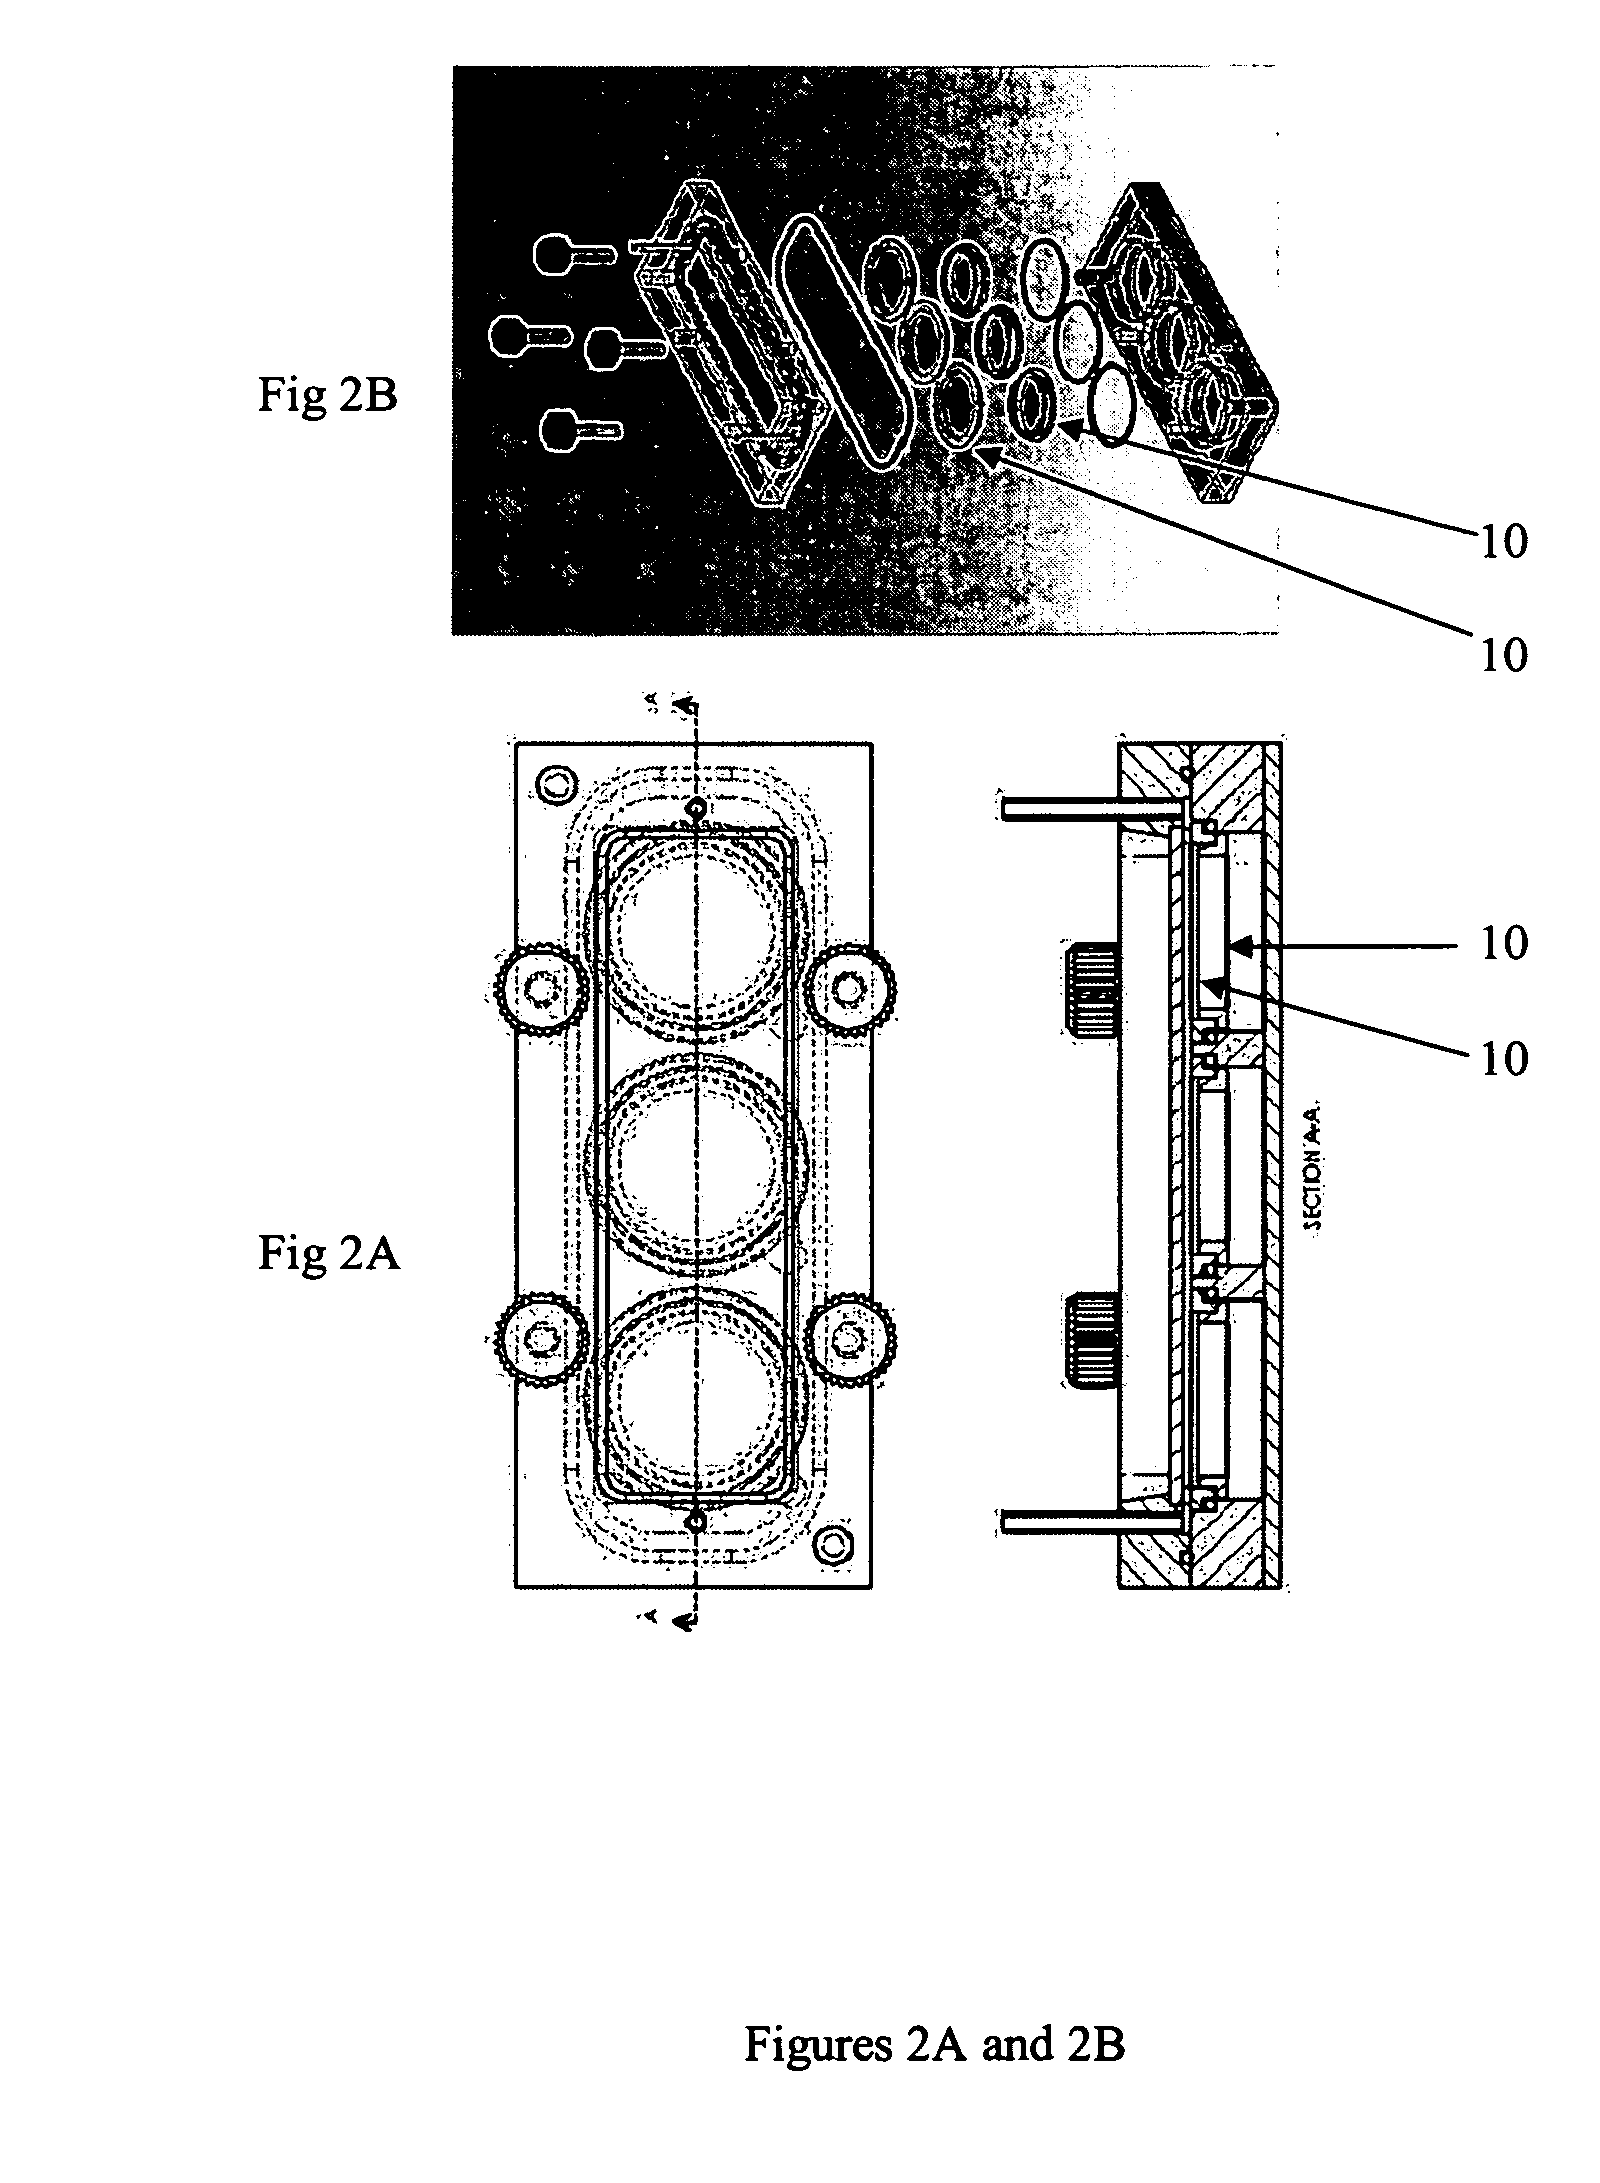 Device for evaluating in vitro cell migration under flow conditions, and methods of use thereof